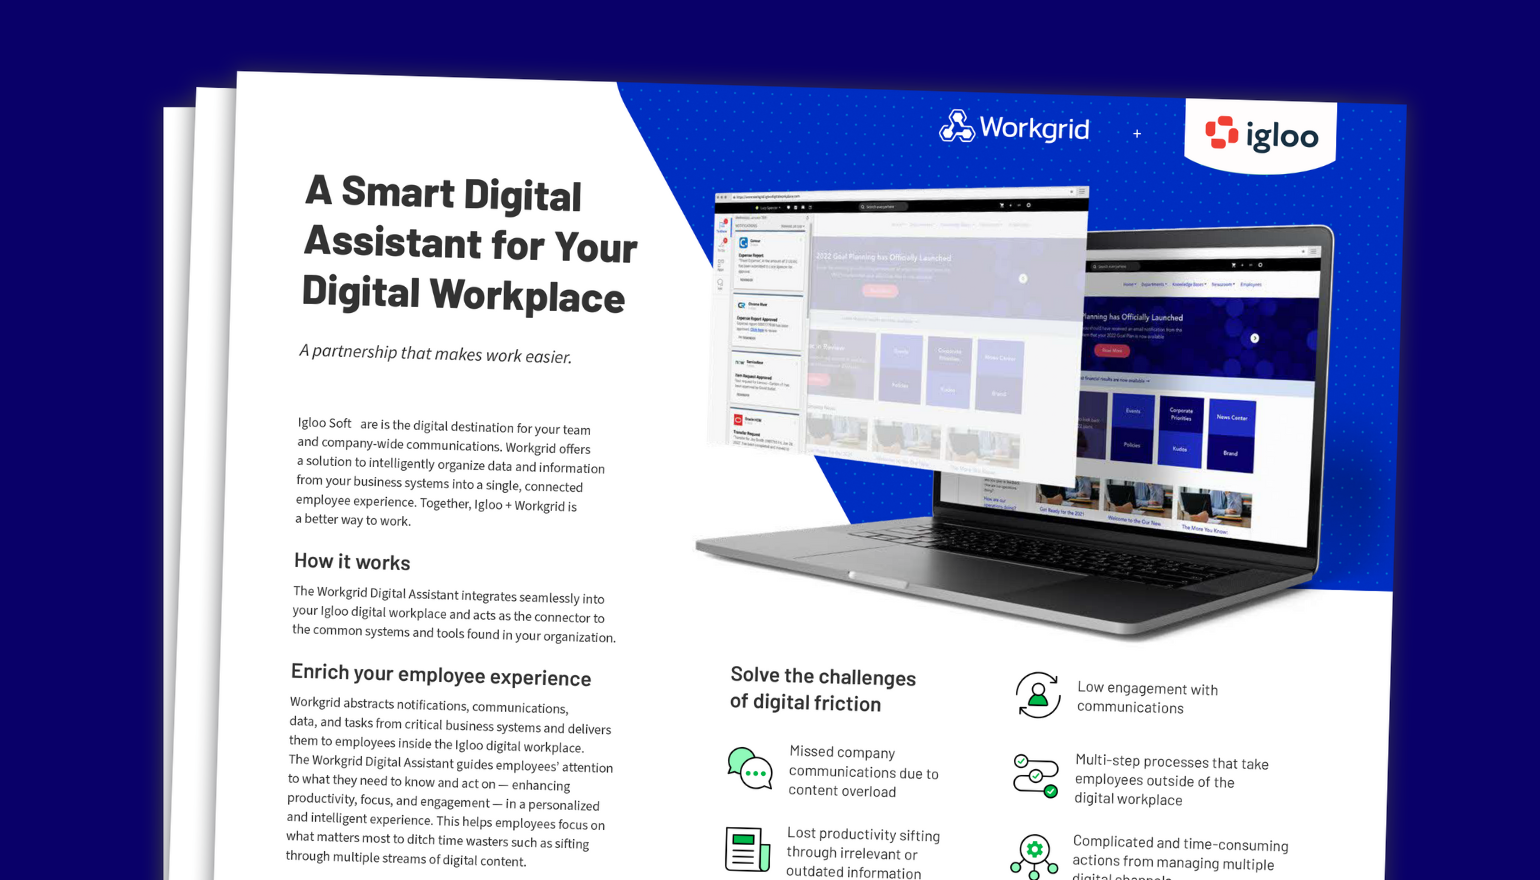 Workgrid + Igloo pairs the power of the Igloo Digital Workplace Platform with the Workgrid Digital Assistant to drive engagement on your company intranet 